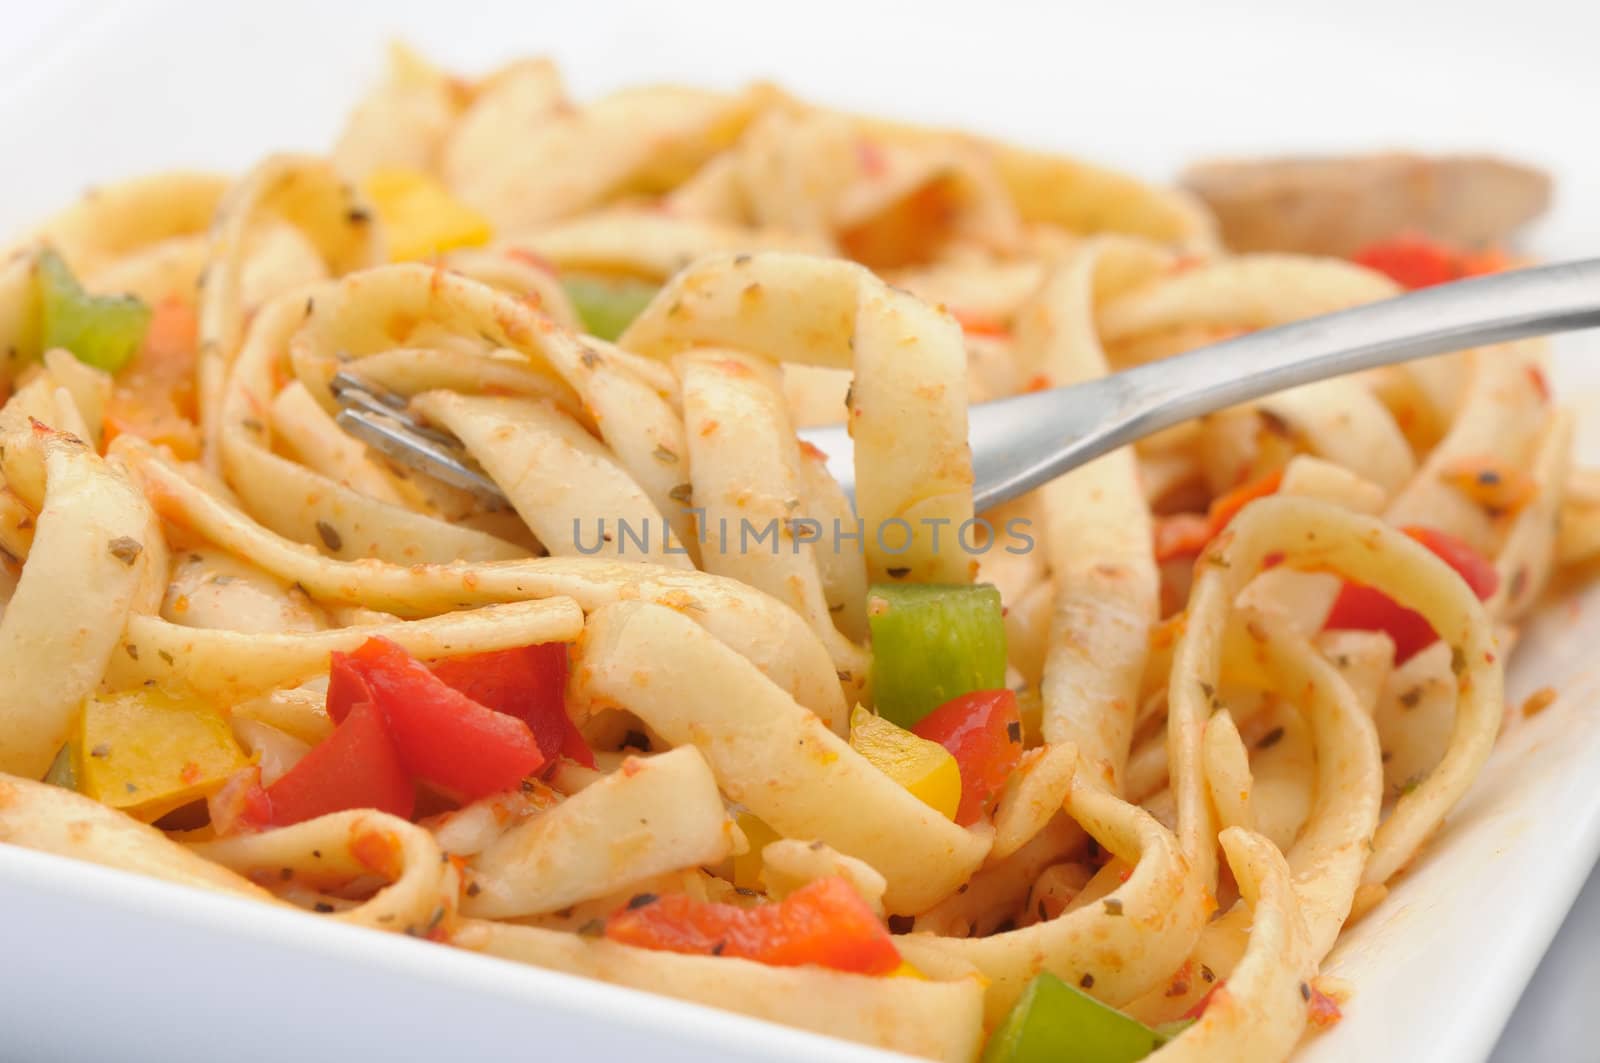 Fresh vegetable and pasta salad with a fork